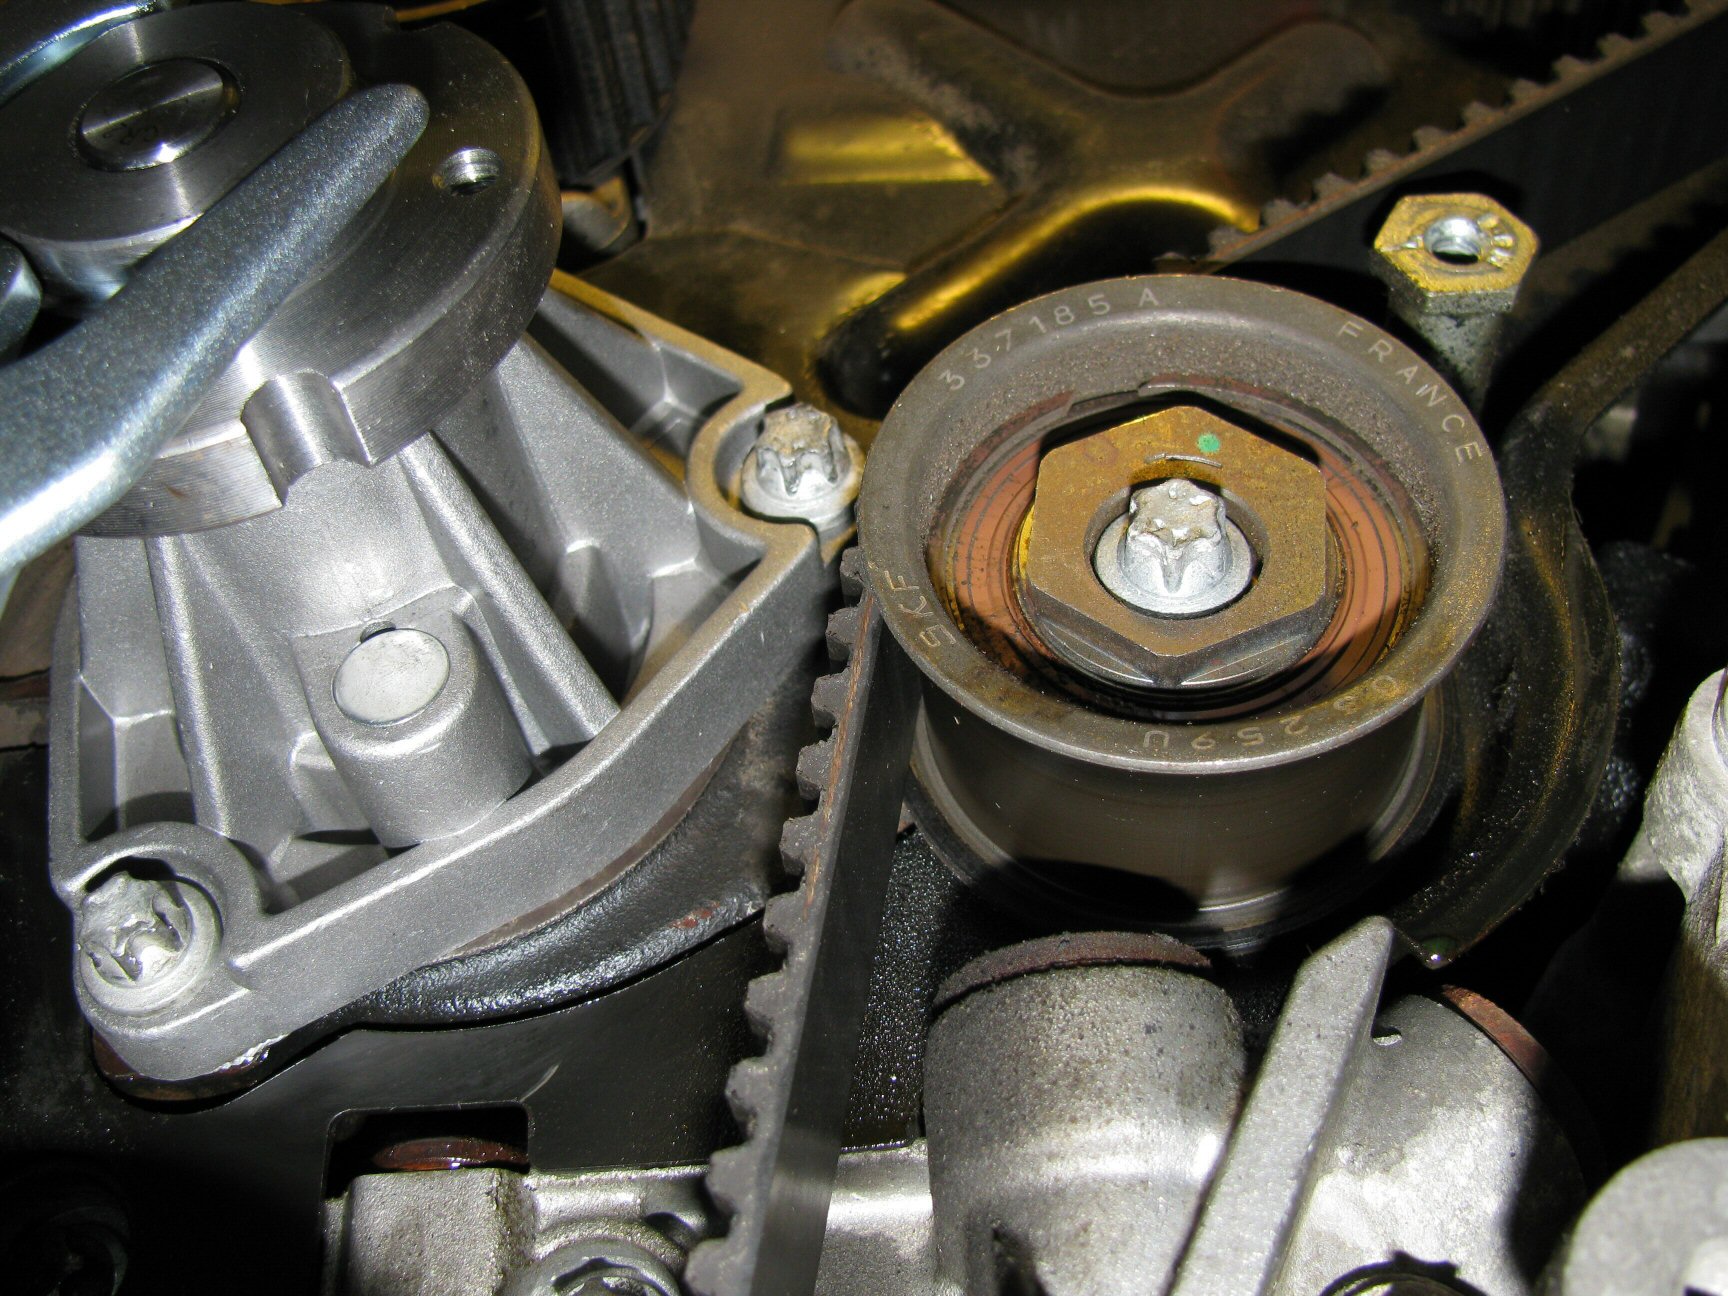 Lower idler pulley. Note the location of the green dot indicating a good initial position of 12 o'clock.